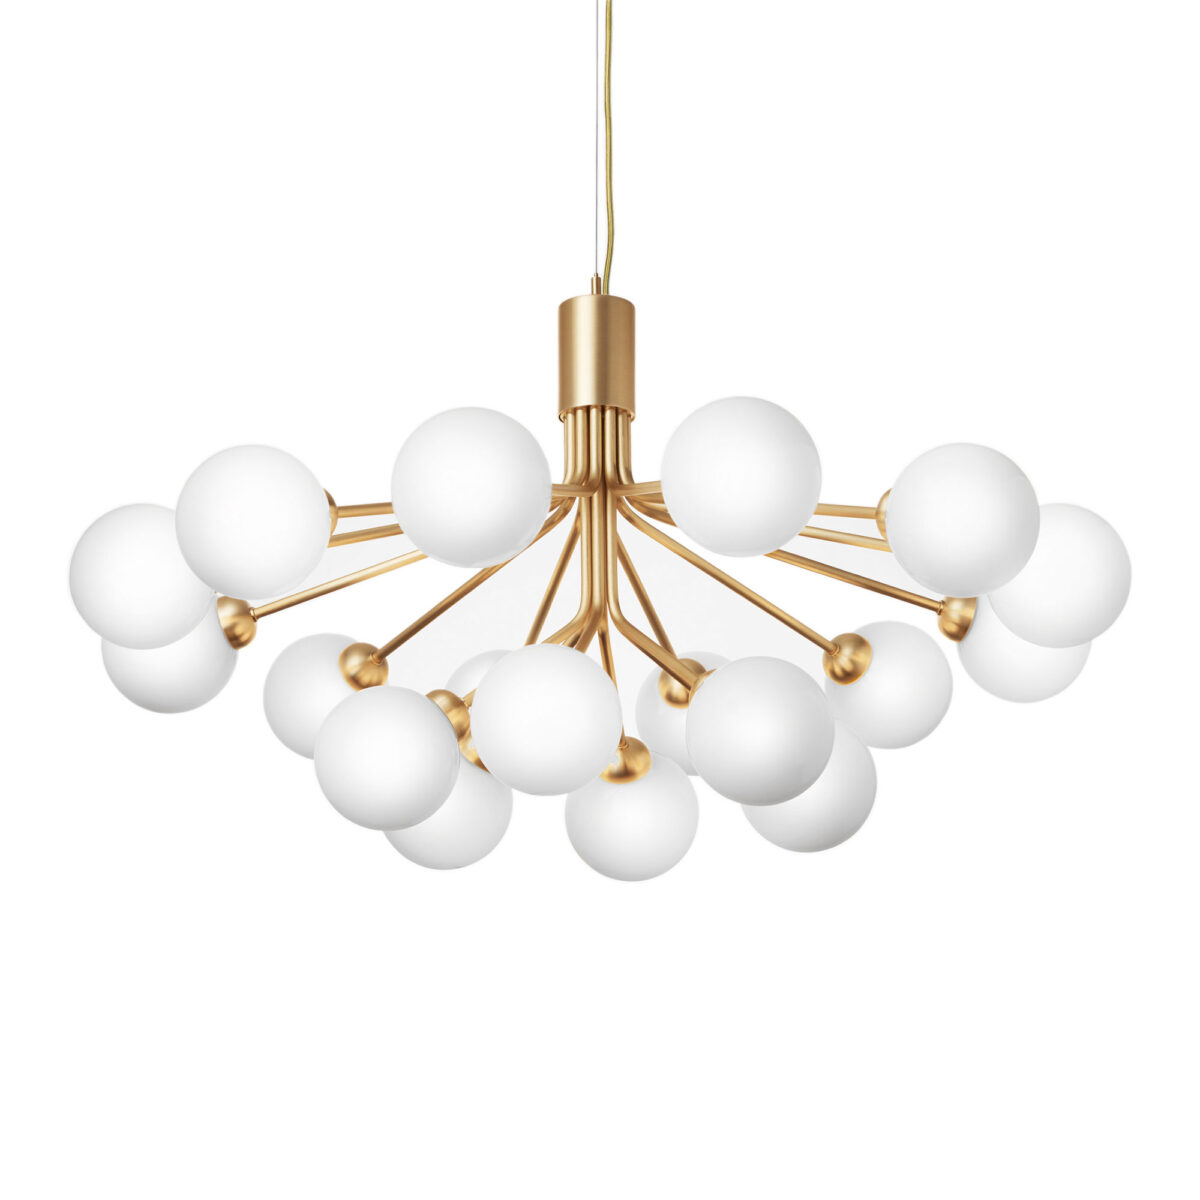 Apiales 18 Brushed Brass/ Opal White